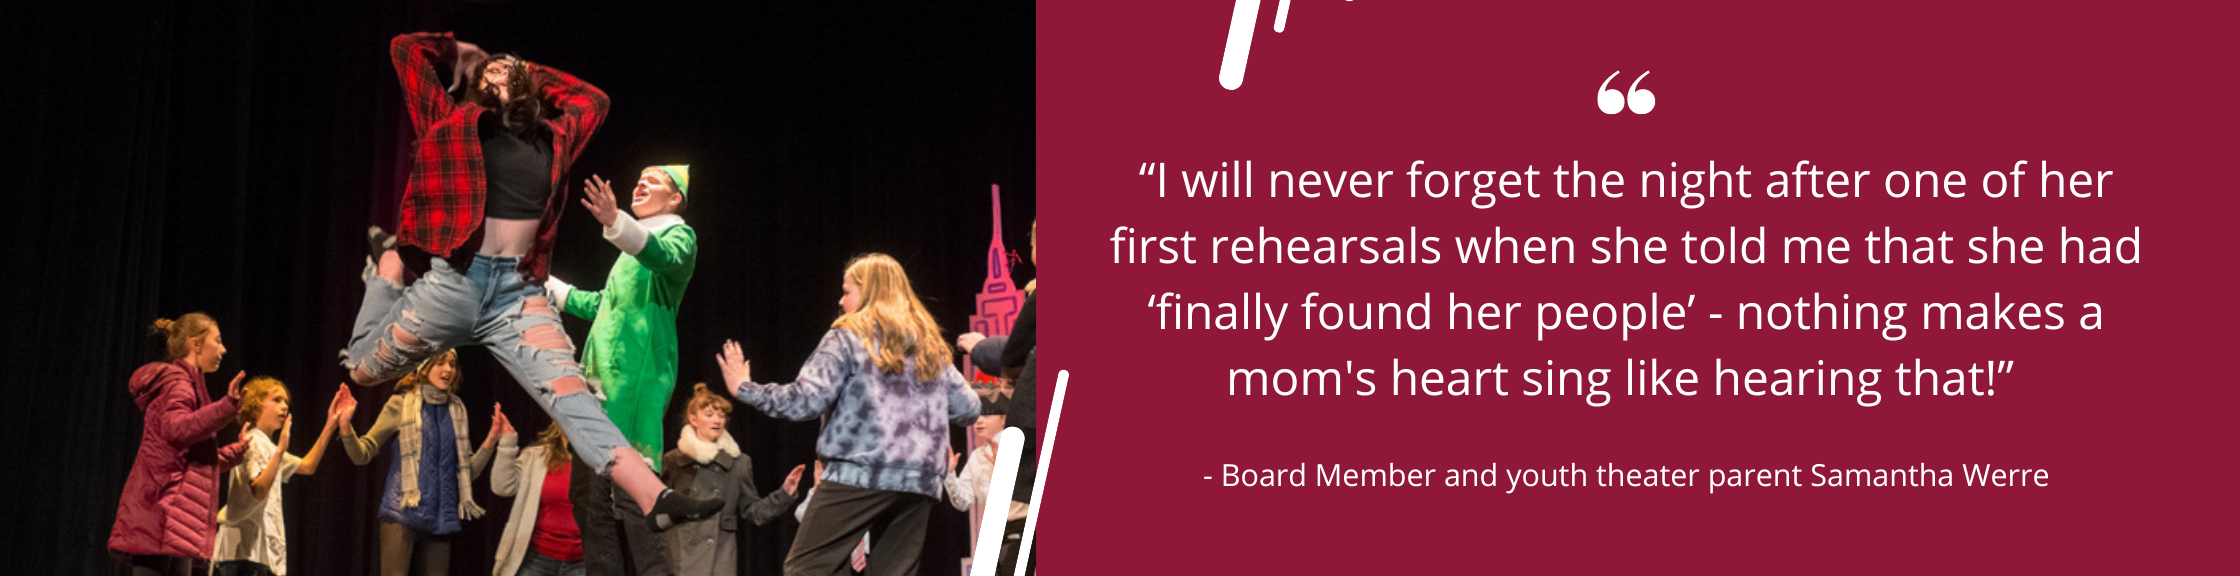 “I will never forget the night after one of her first rehearsals when she told me that she had ‘finally found her people’ - nothing makes a mom's heart sing like hearing that!”<br />
